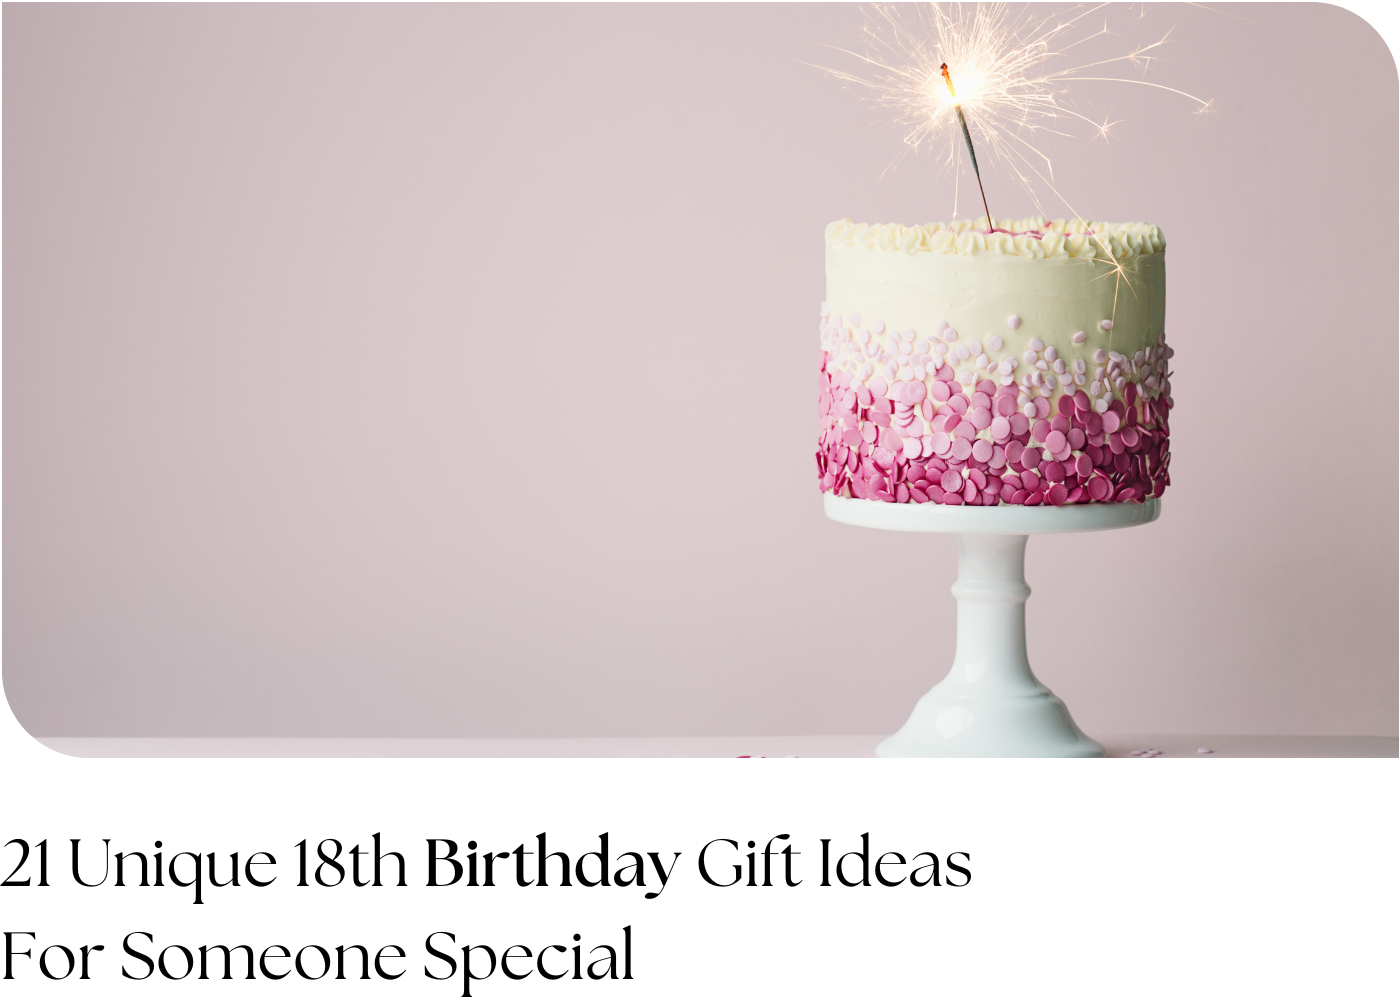 6 Gift Ideas to Surprise That Special Someone | The Inspiring Journal